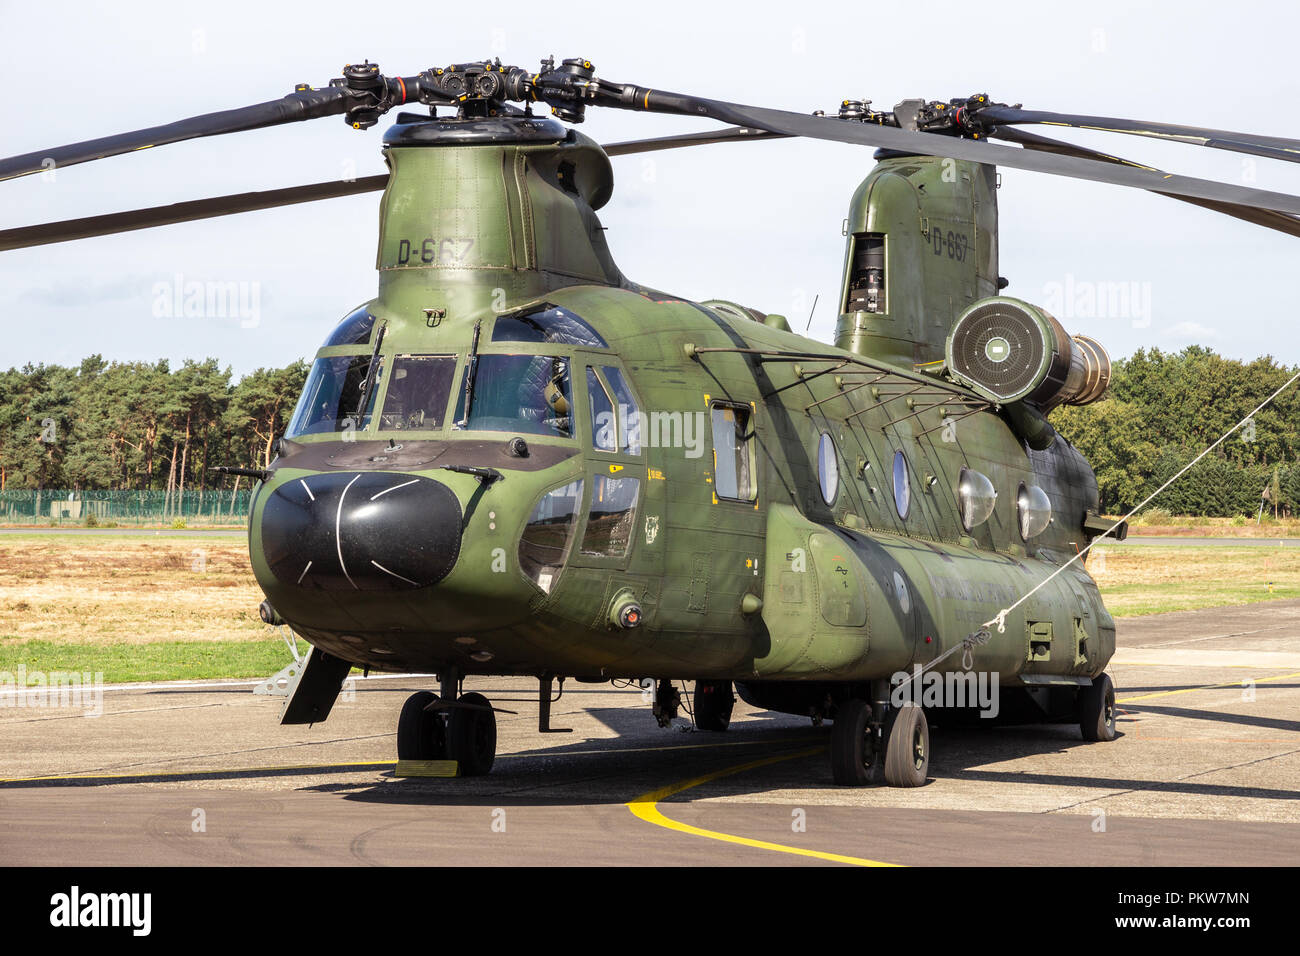 KLEINE BROGEL, BELGIUM - SEP 8, 2018: Royal Netherlands Air Force Boeing CH-47D Chinook transport helicopter on the tarmac of Kleine-Brogel Airbase. Stock Photo